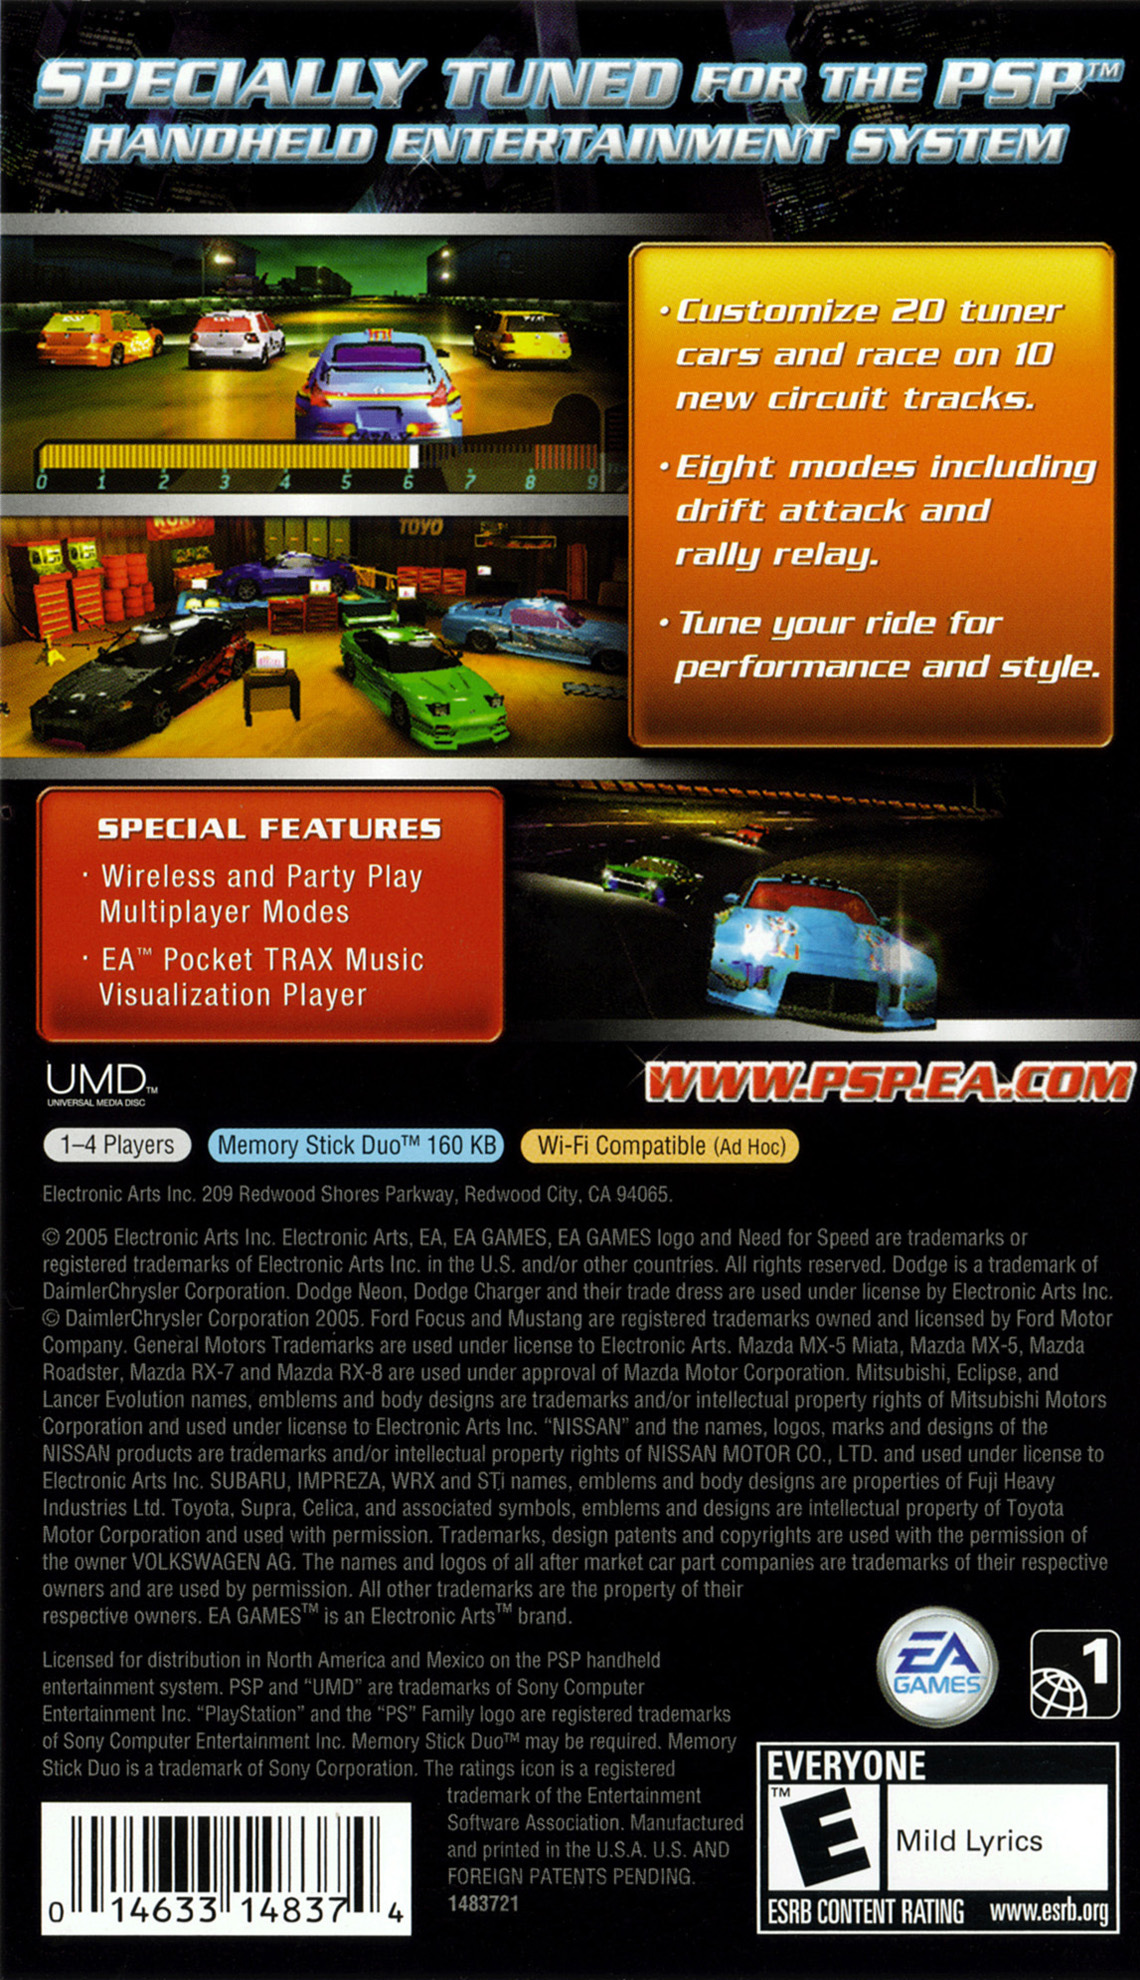 Need for Speed: Underground Rivals Images - LaunchBox Games Database